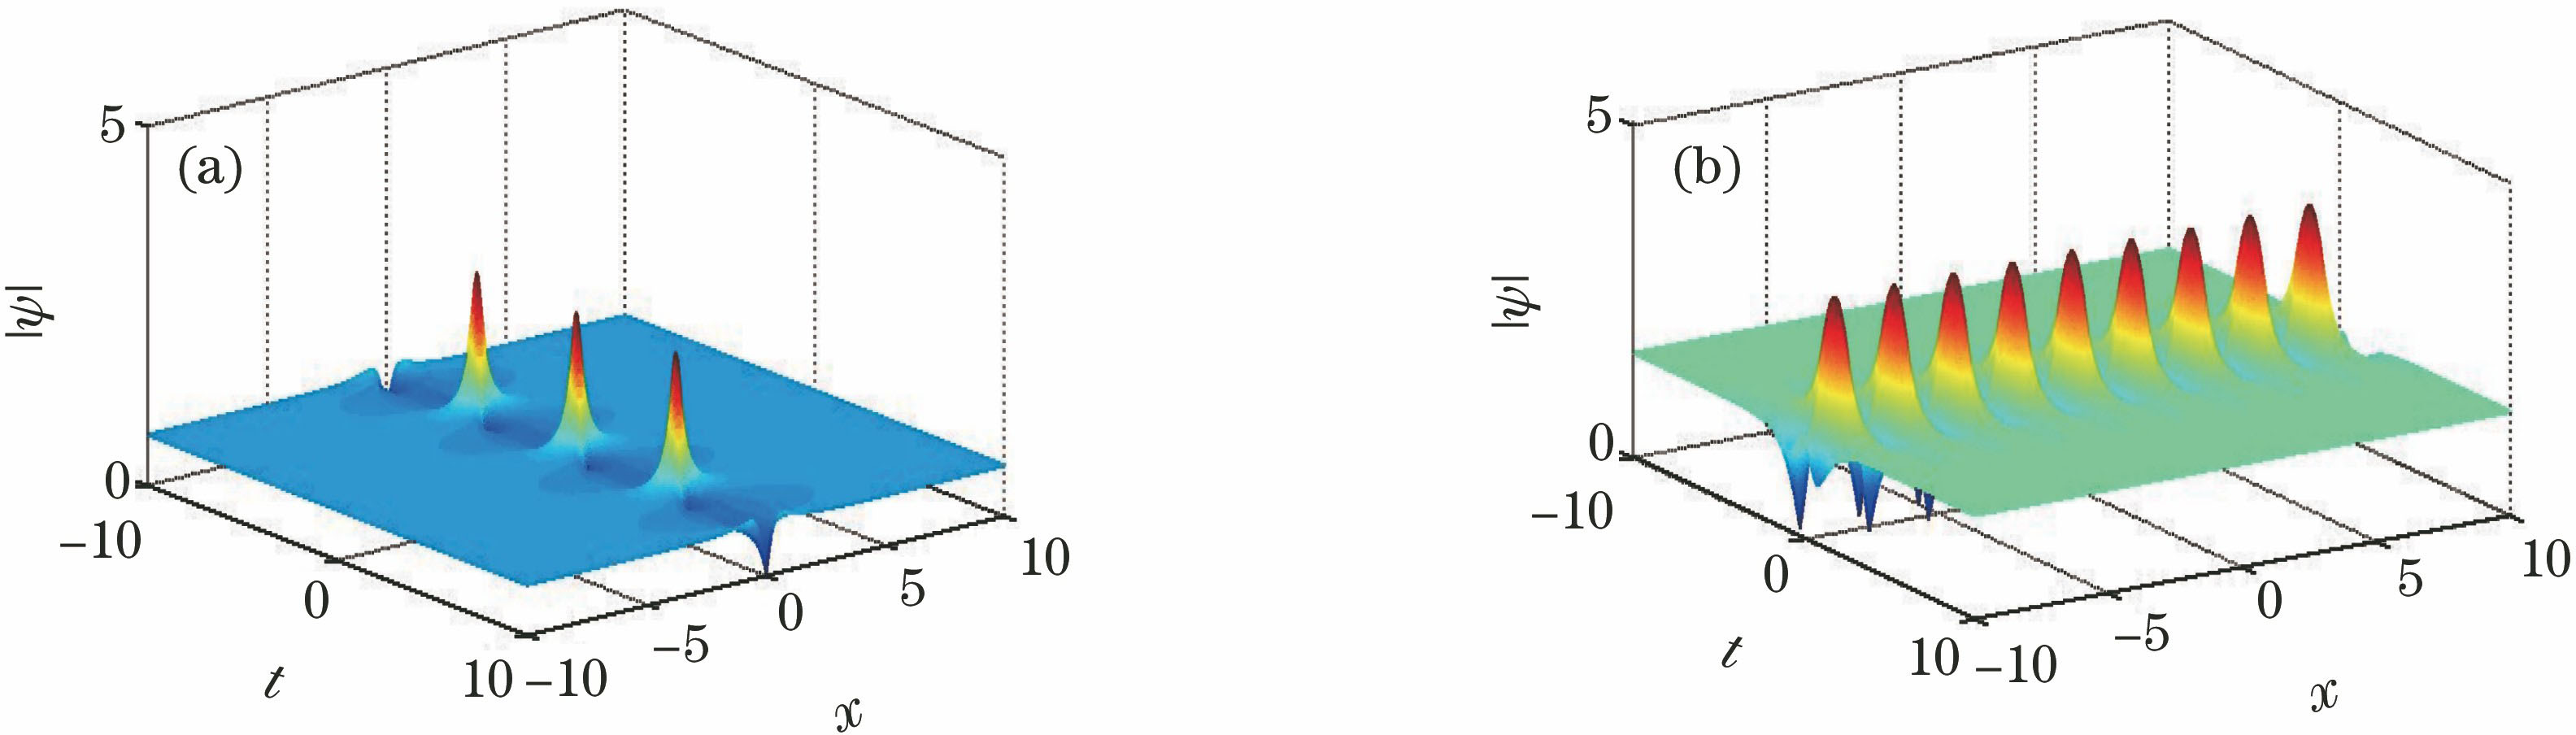 Effect of parameter b1 on breather characteristics. (a) Akhmediev breather with b1=0.8;(b) Kuznetsov-Ma soliton with b1=1.25. The other parameters are a=0, c=1, a1=0, α4=1/32